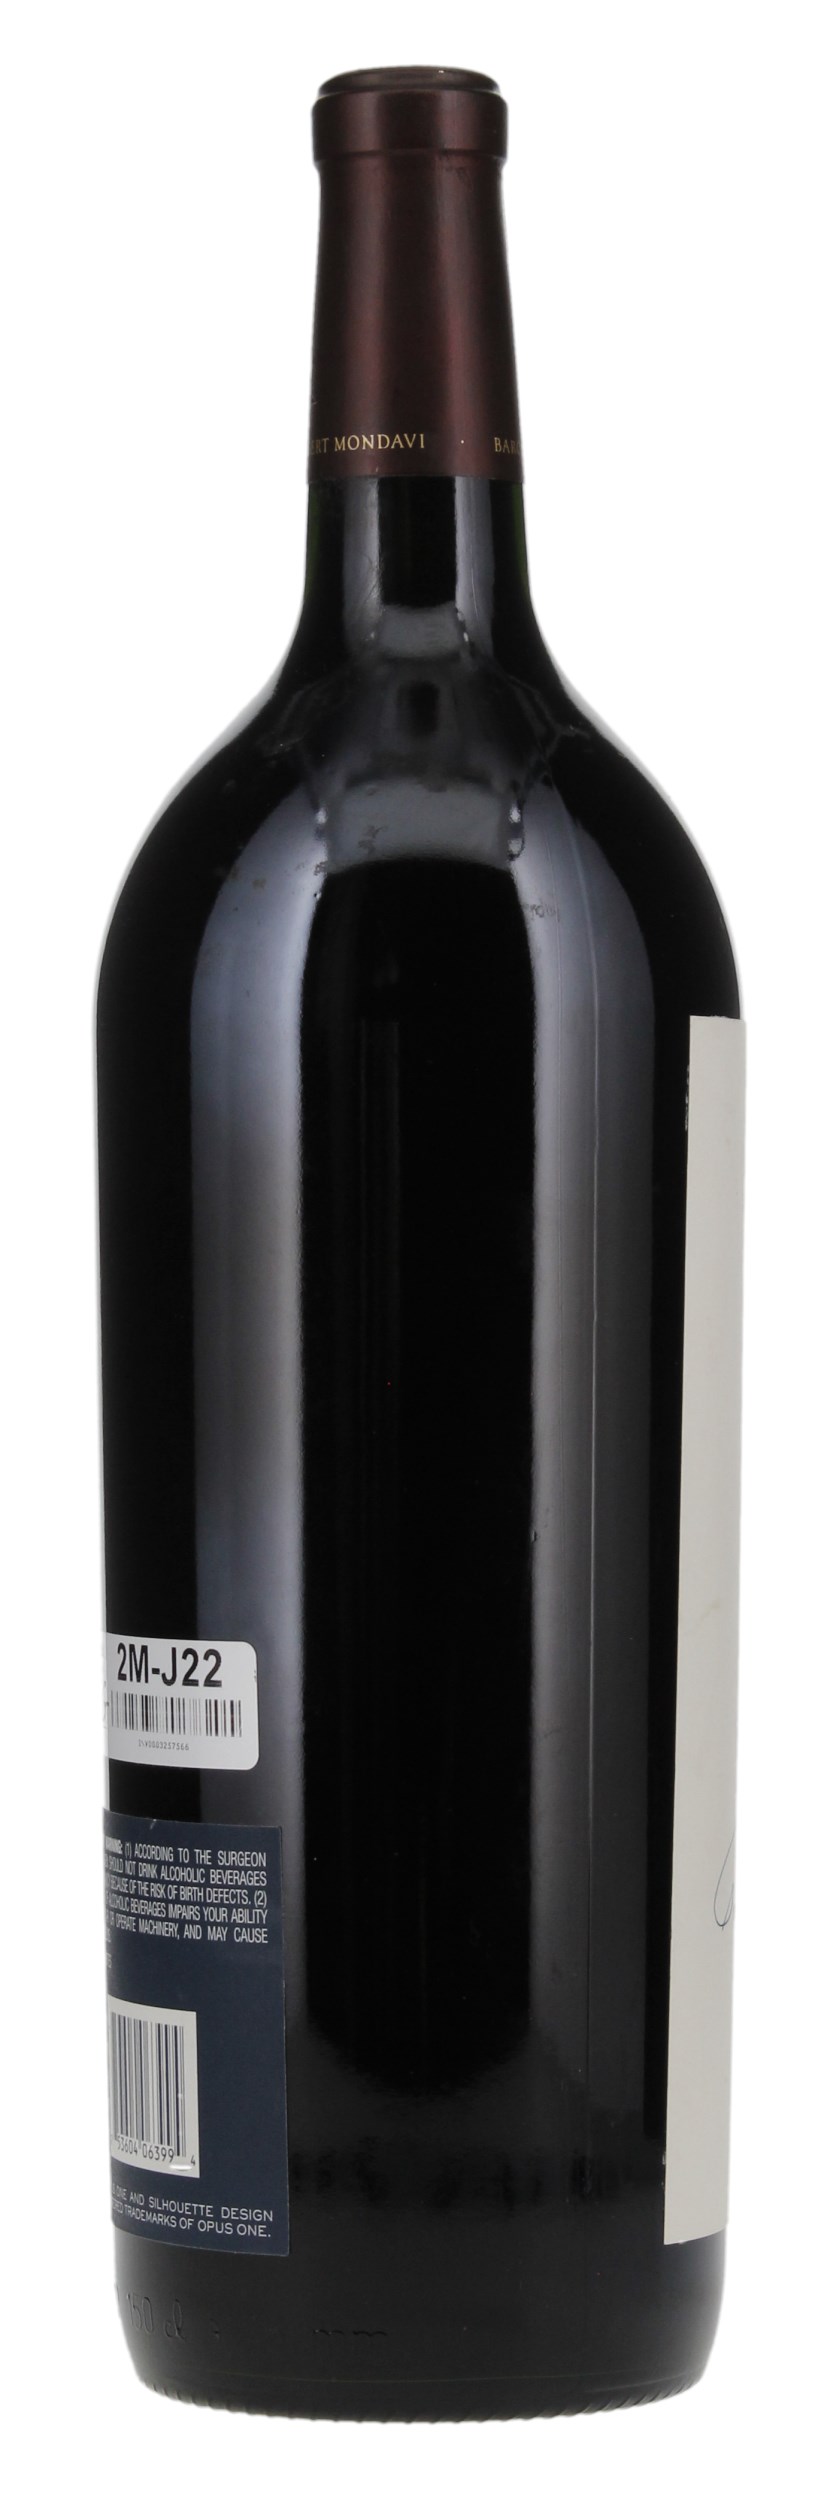 1999 Opus One, 1.5ltr